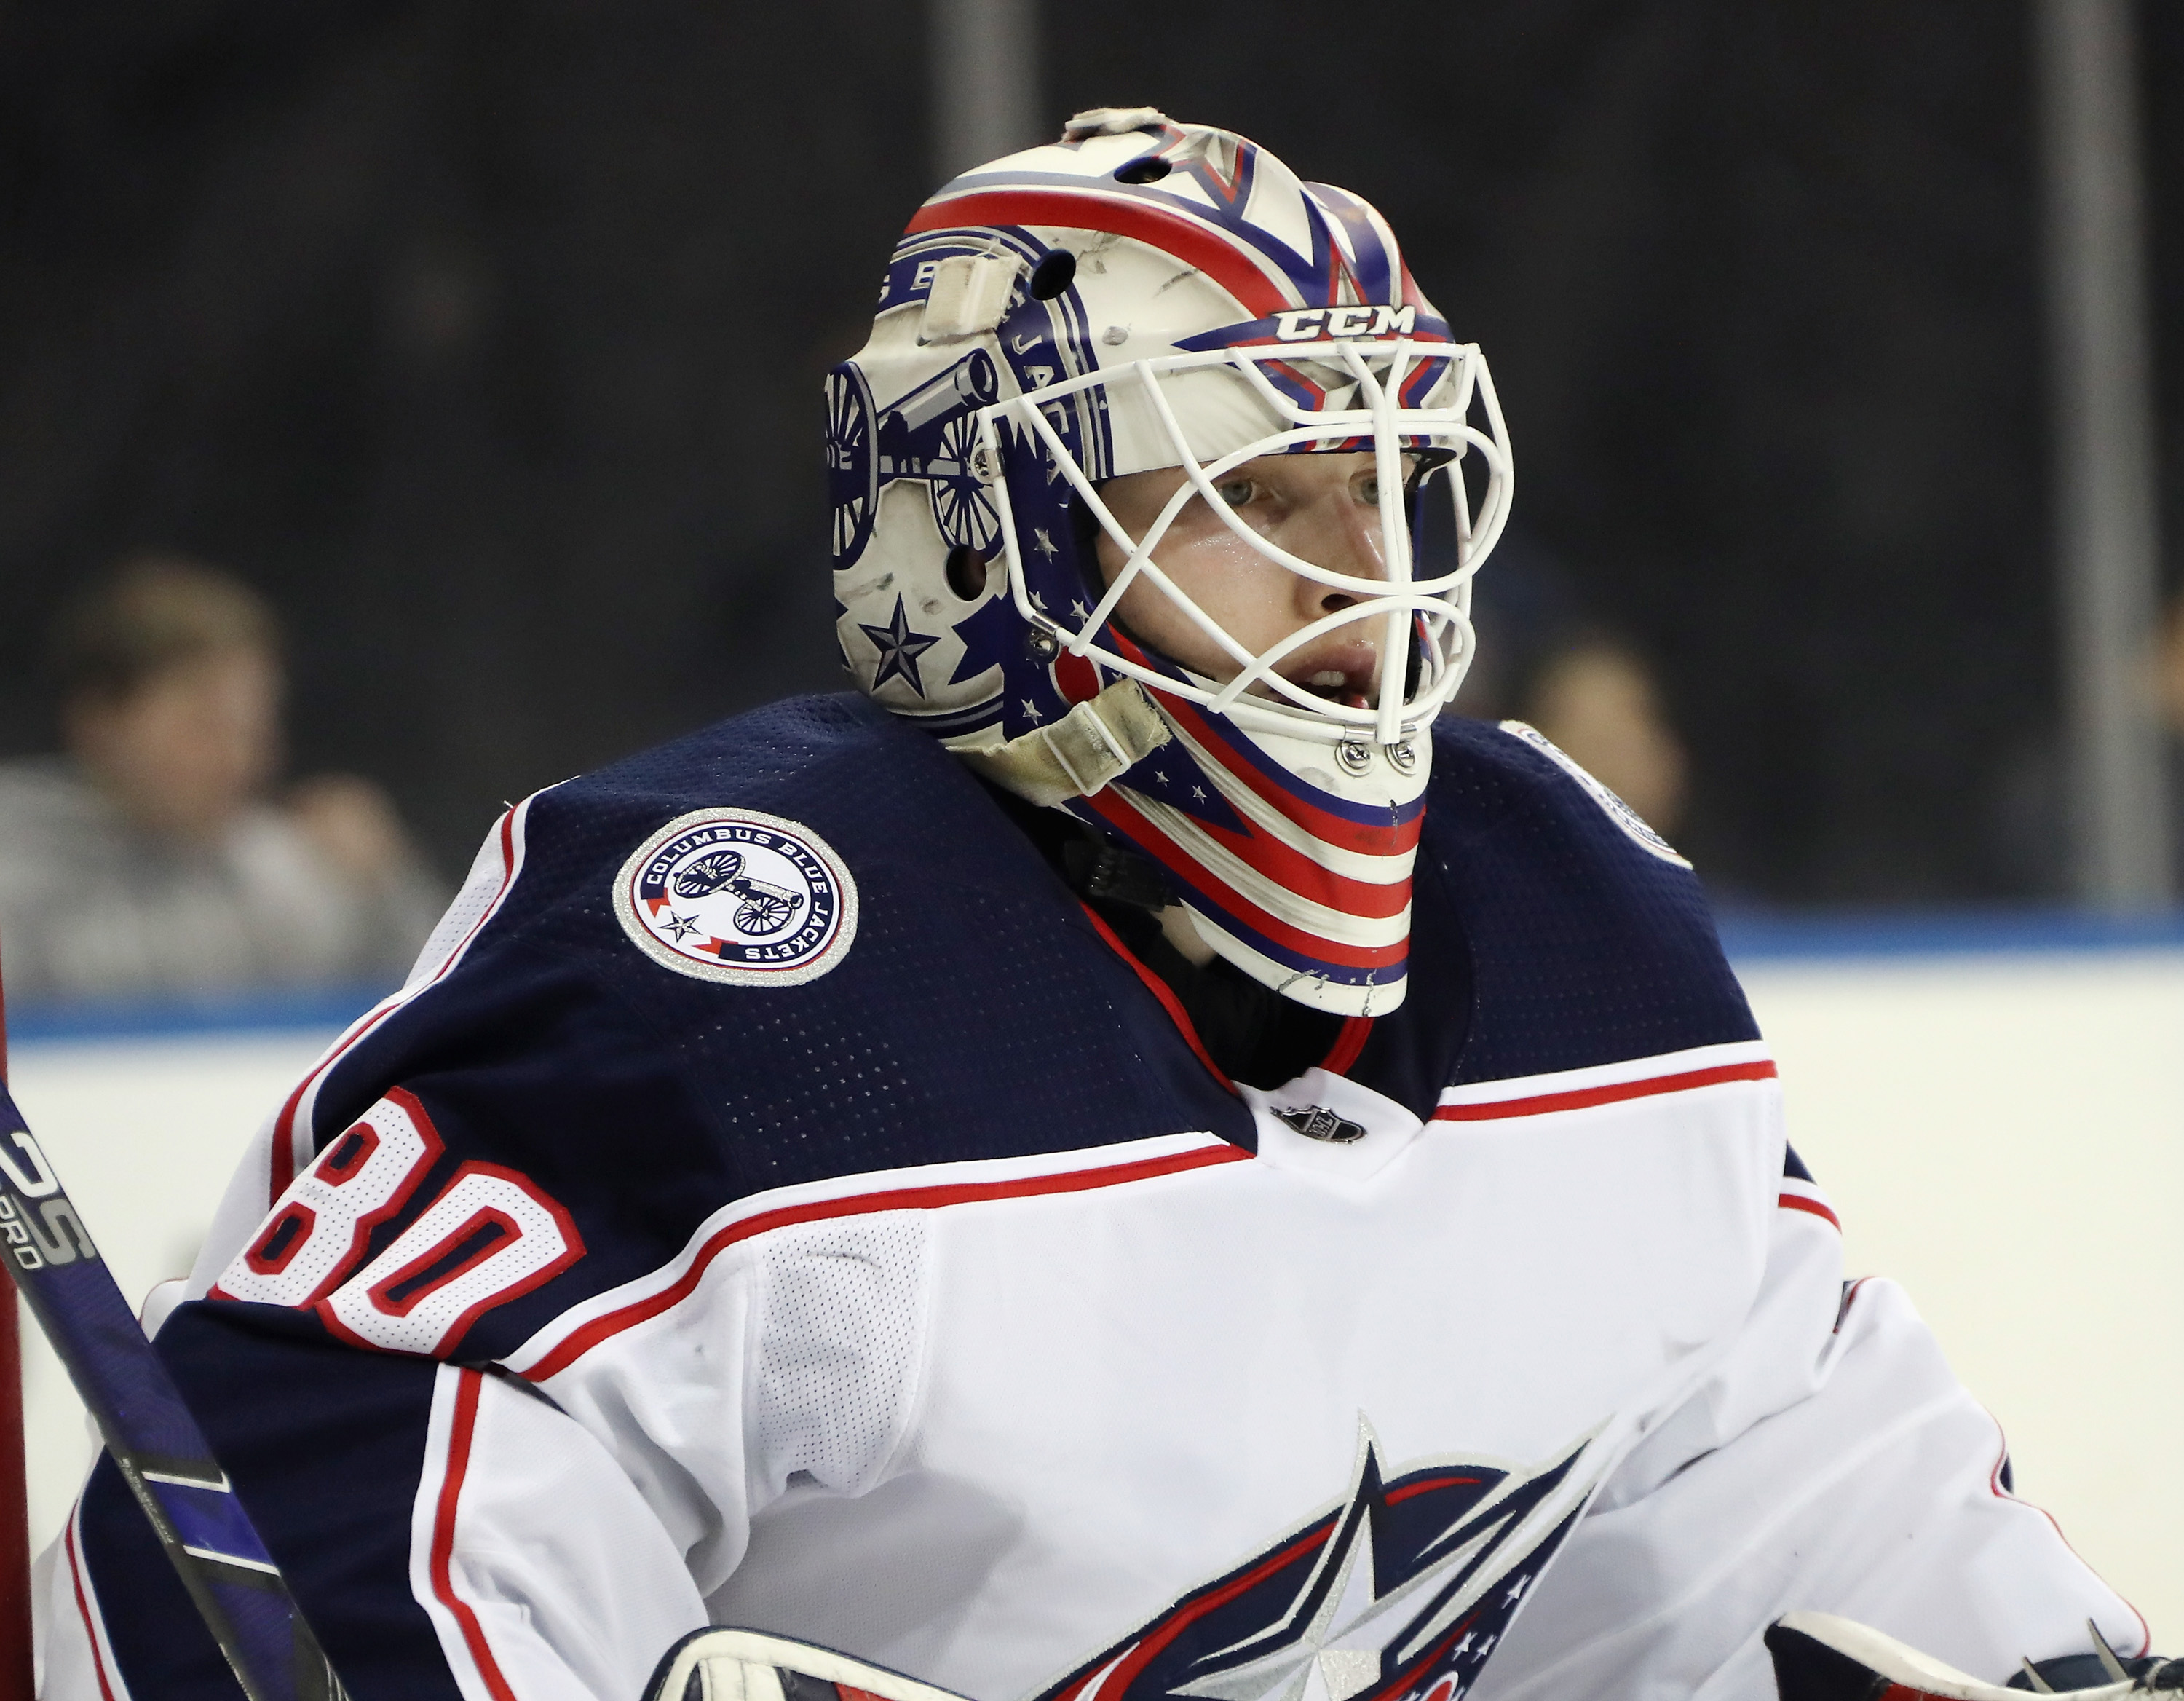 Blue Jackets Goalie Dies After Being Hit By Firework While In A Hot Tub